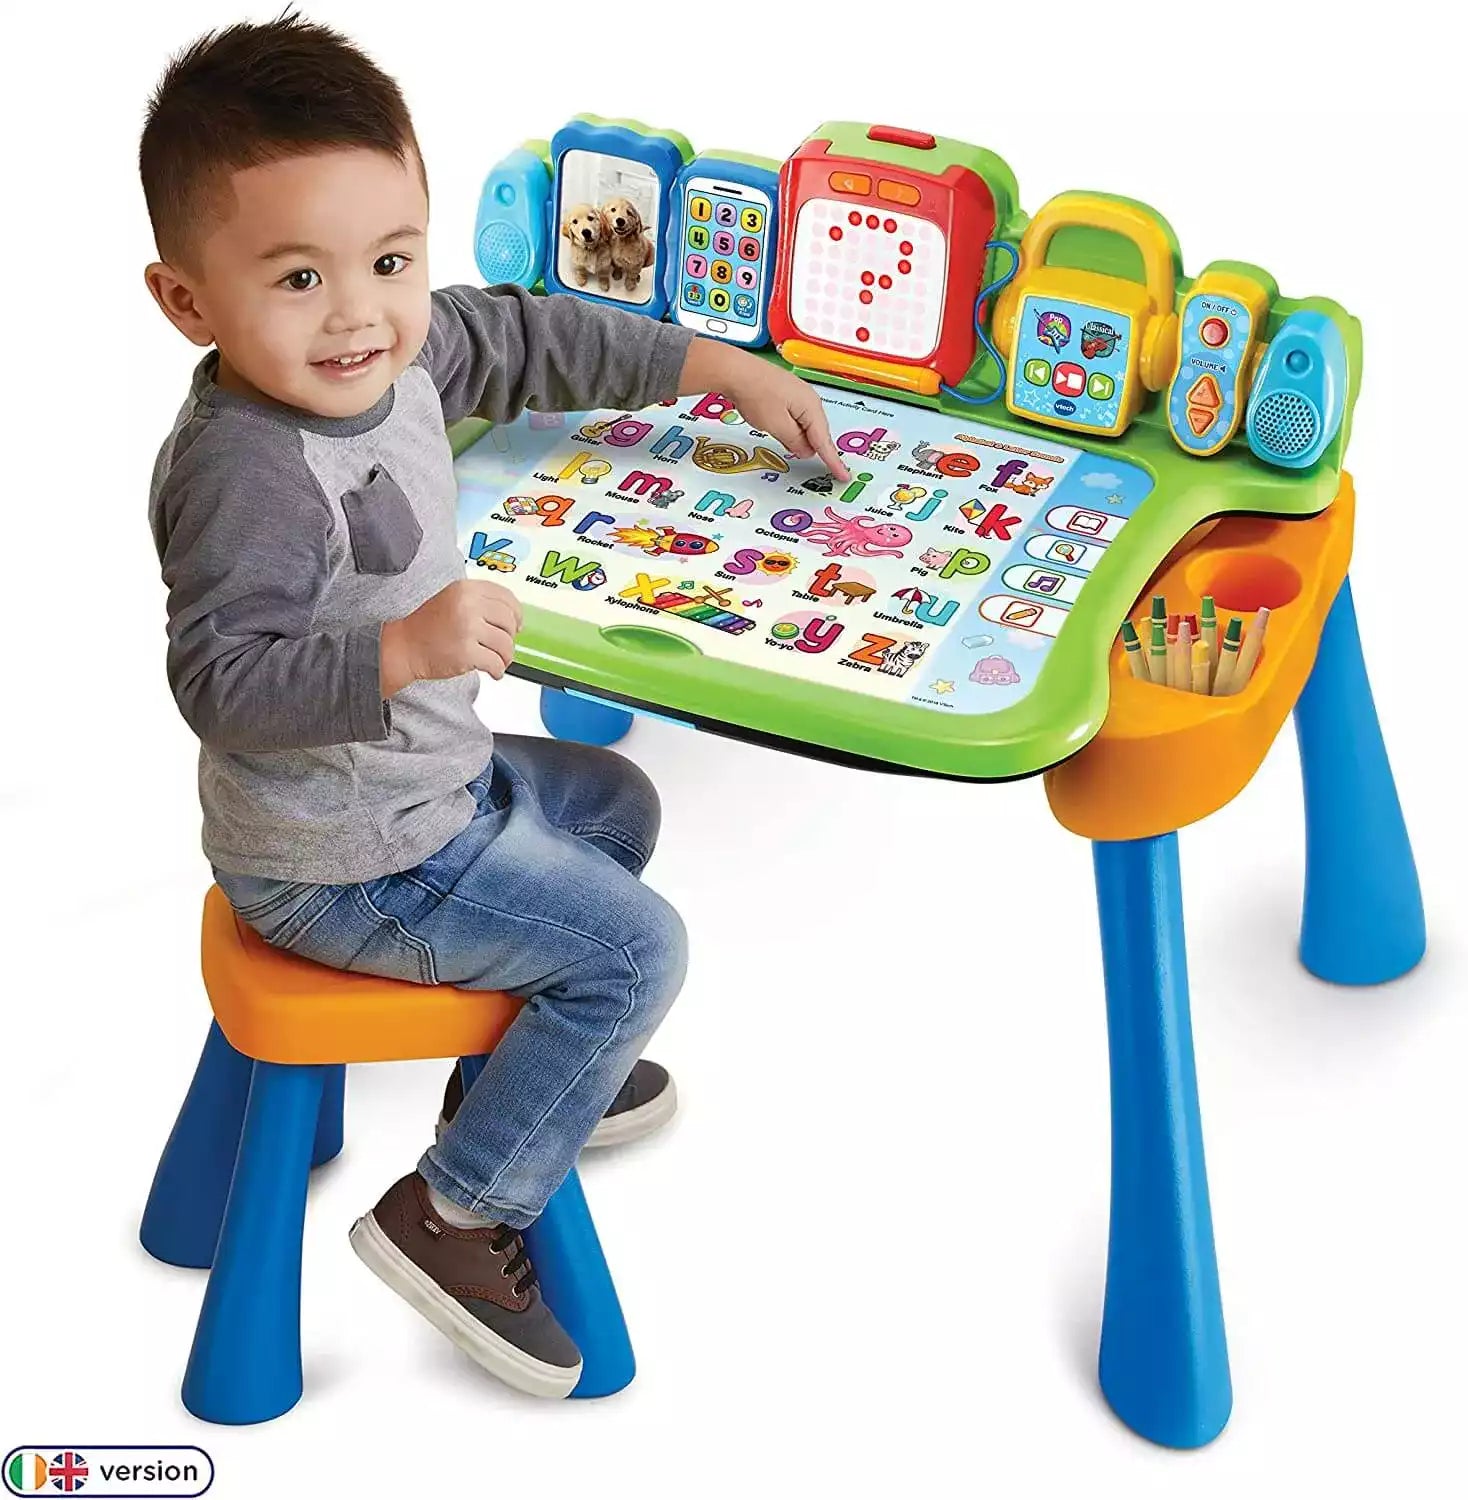 Early Childhood Learning toy for Toddlers - Touch & Learn Activity Desk- Shop Vtech toy